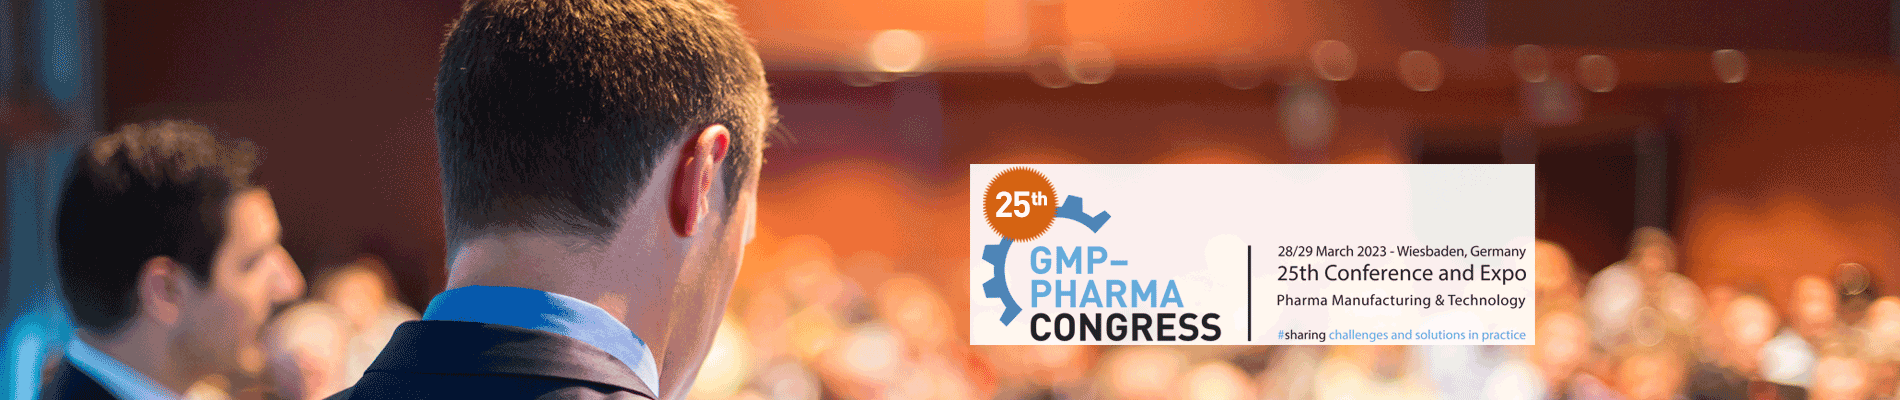 25th GMP-PharmaCongress Conference 2023 - Wiesbaden, Germany